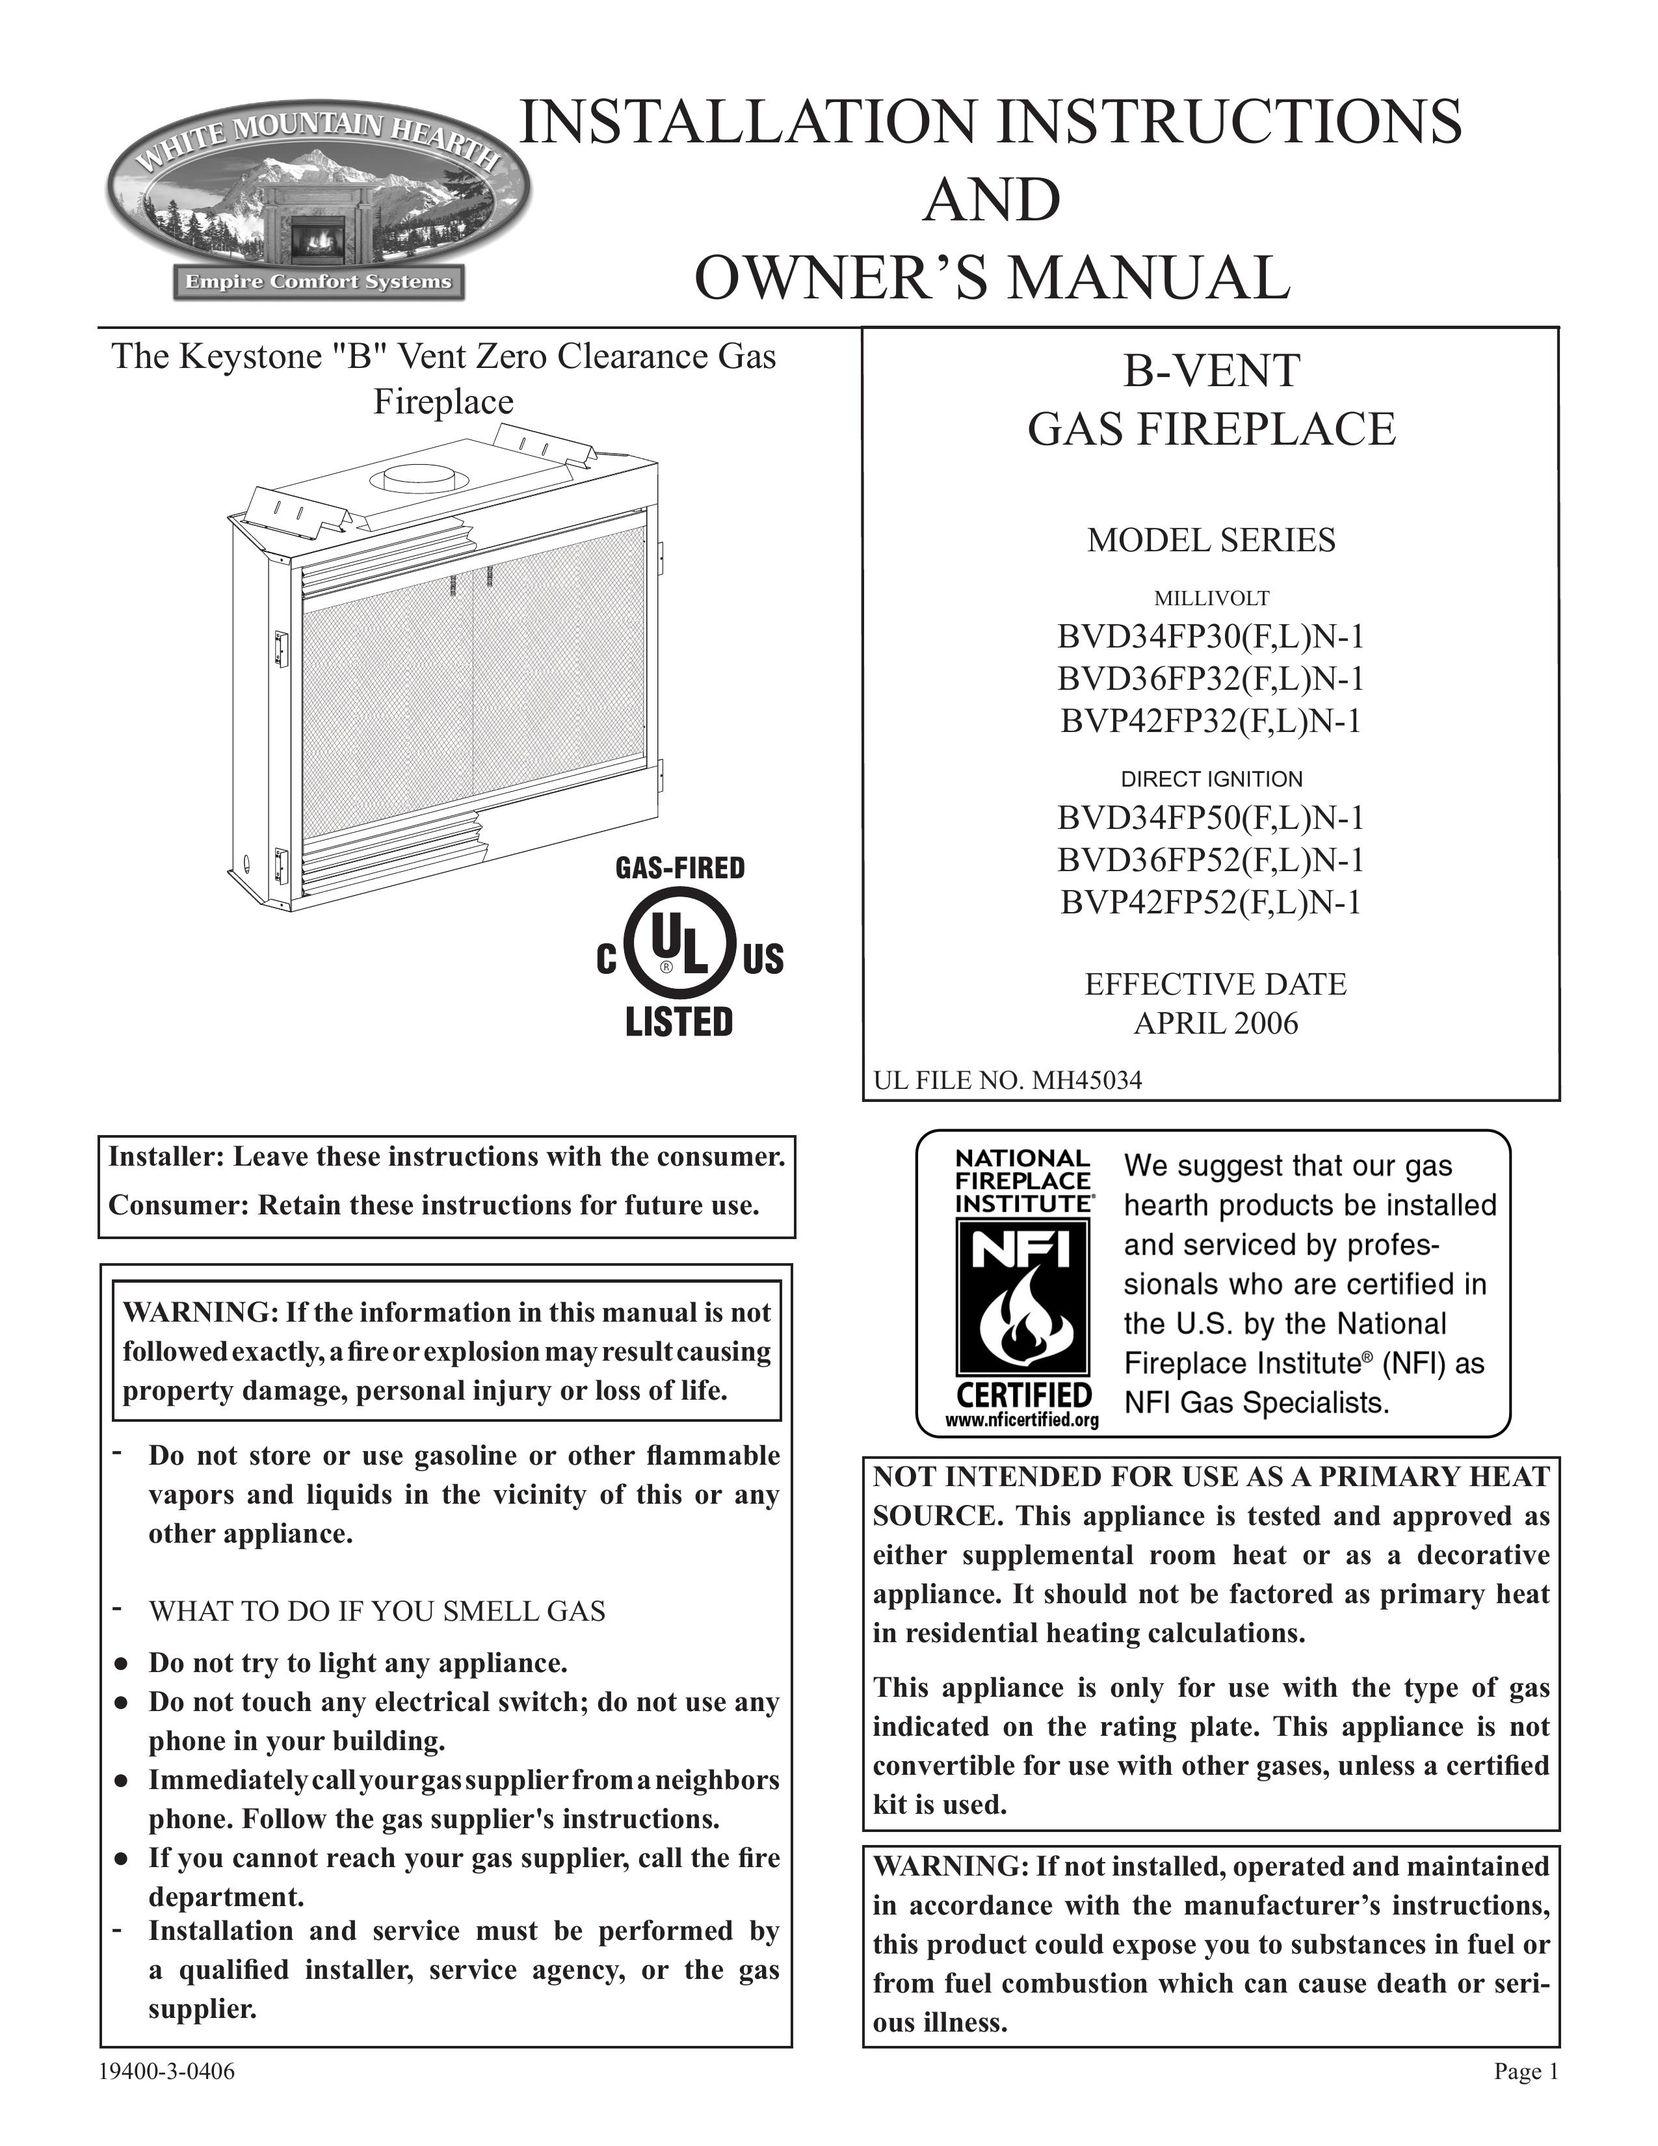 Empire Comfort Systems BVD34FP50 Indoor Fireplace User Manual